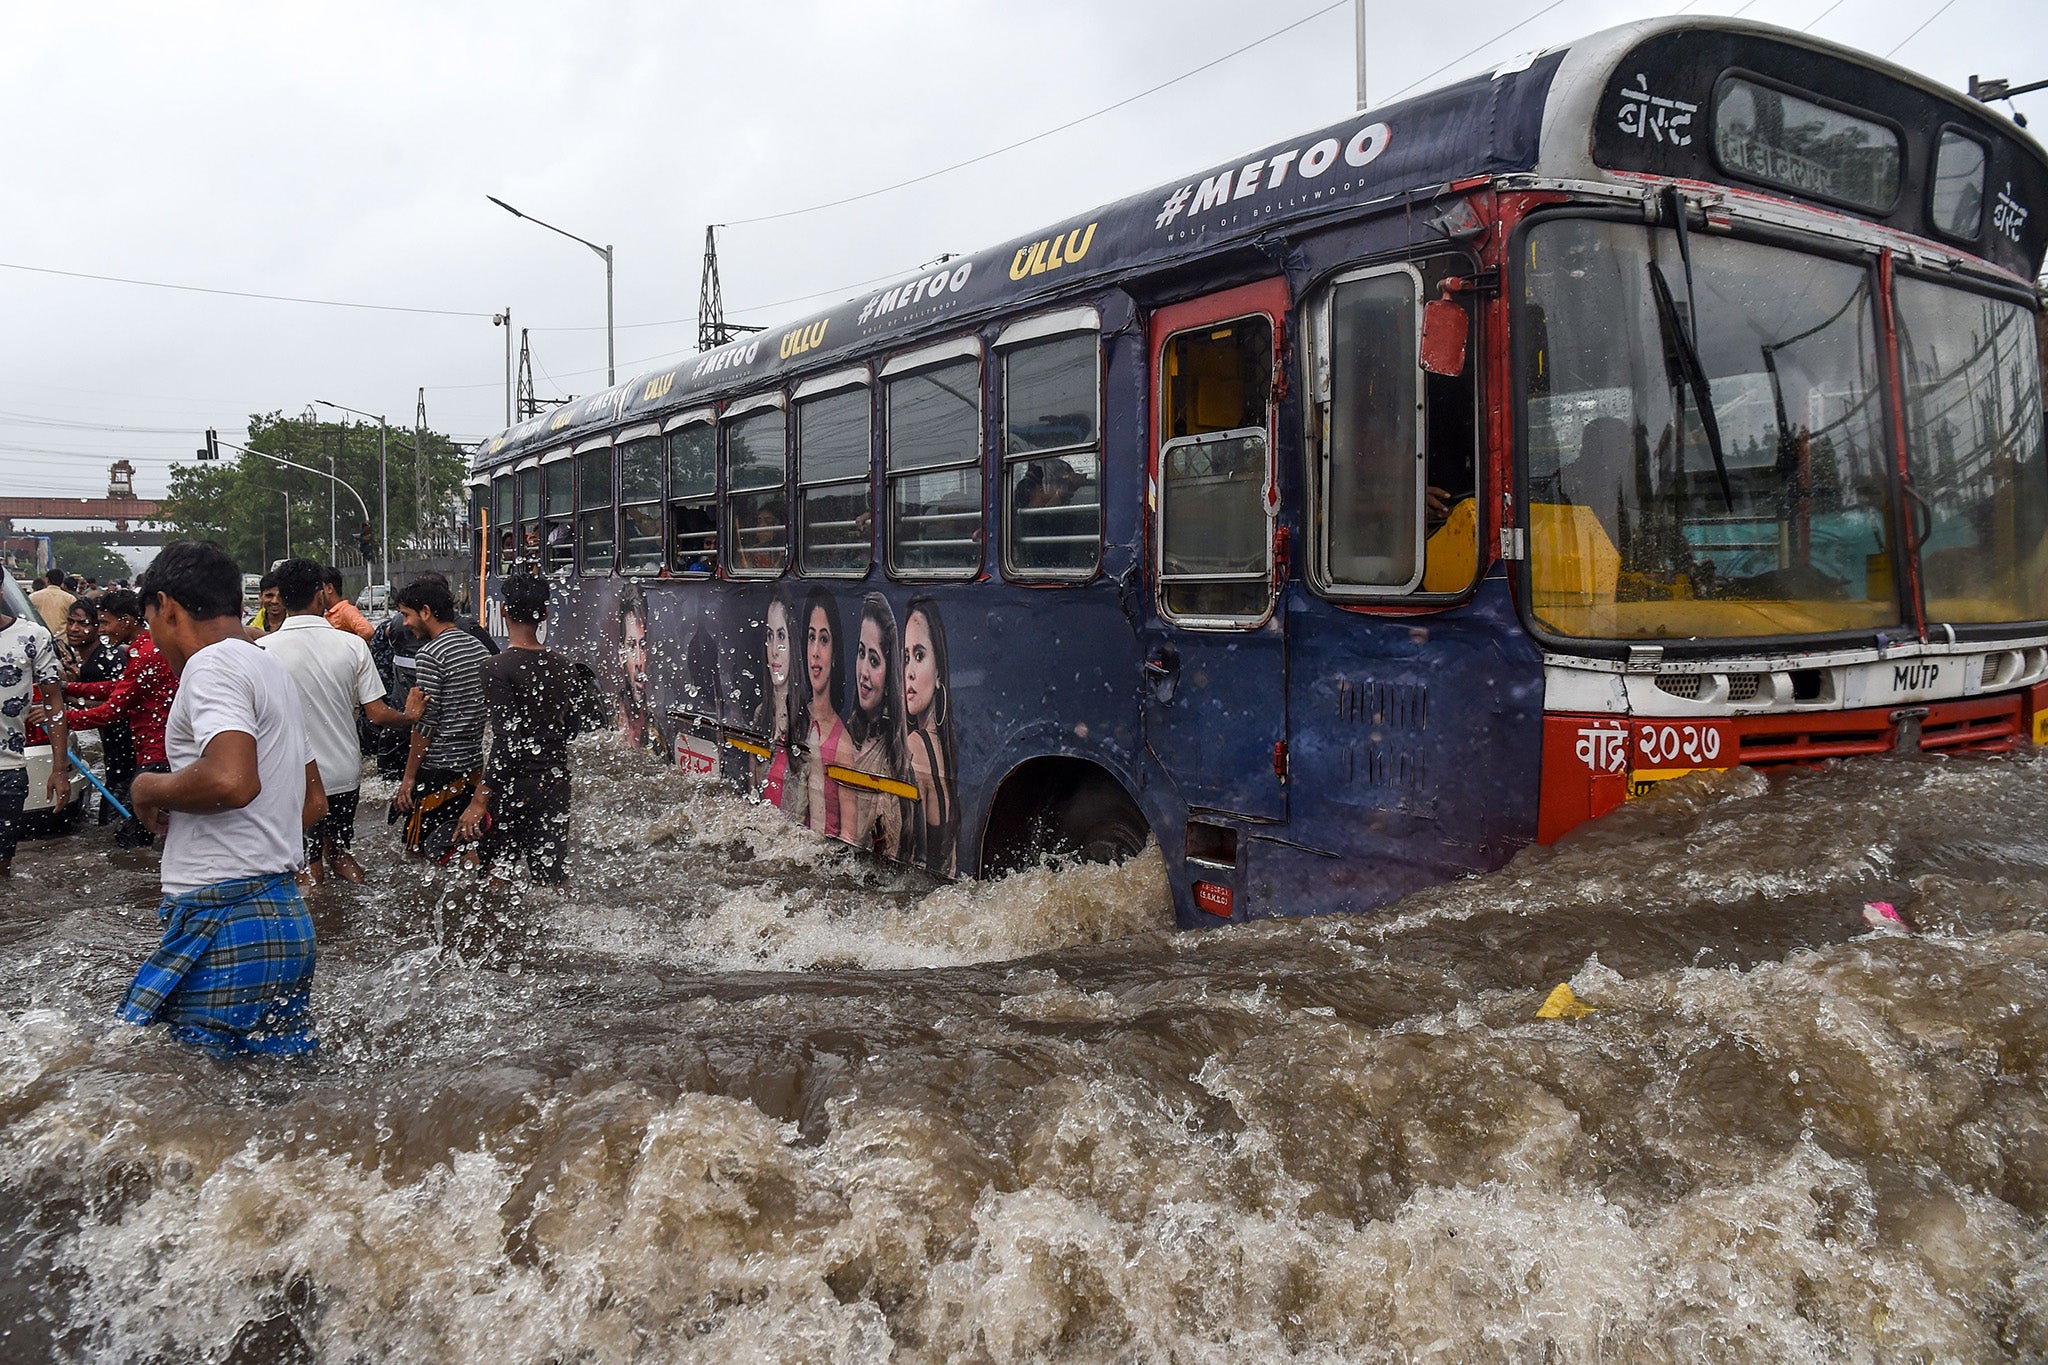 A public bus makes its way on a flooded road after heavy rains in Mumbai in August